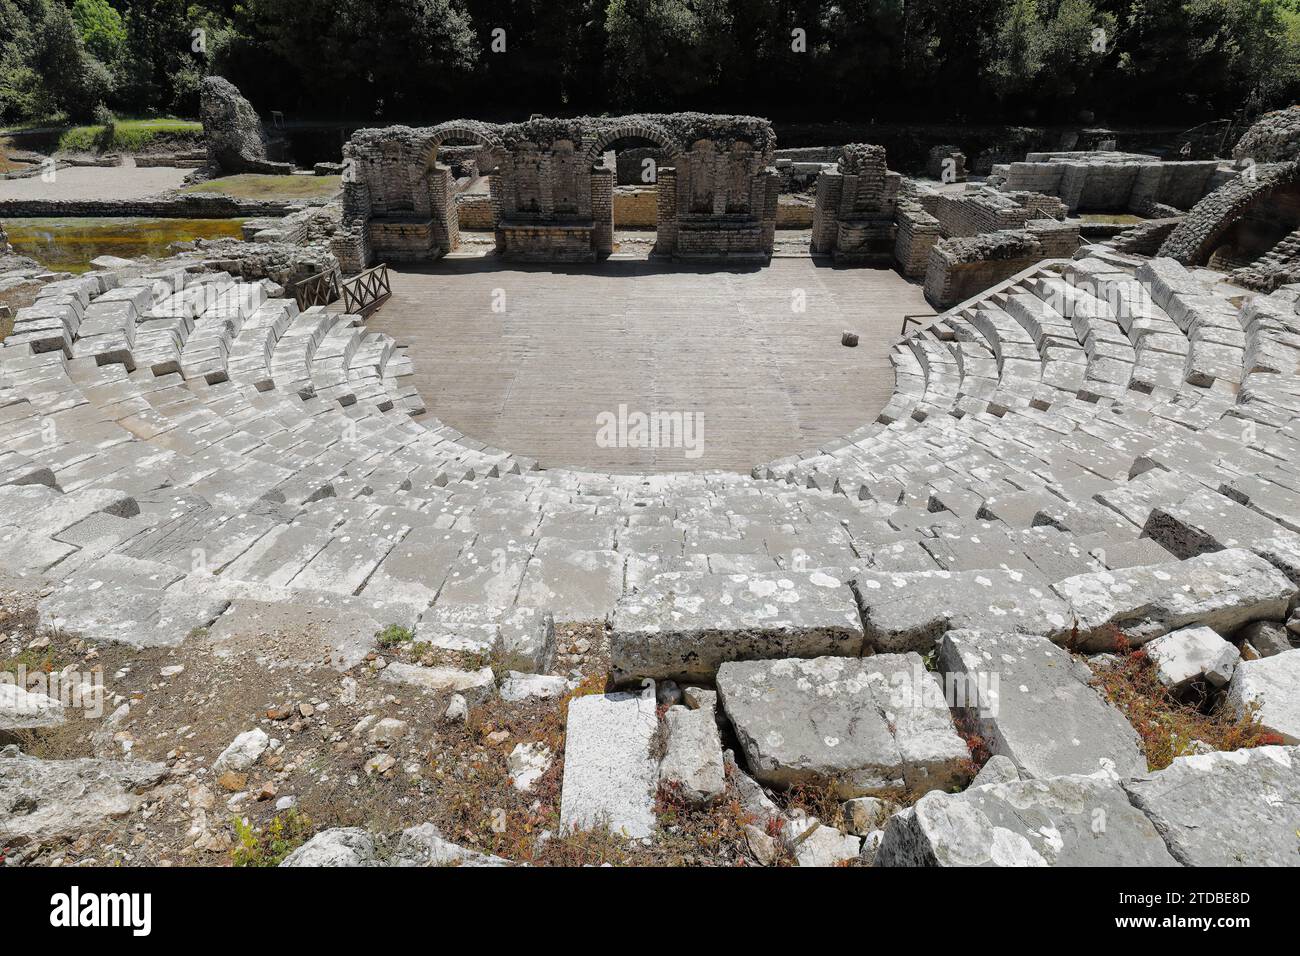 143 Cavea, proscenium, orchestra of the Hellenistic theatre dated in the mid-3rd.century BC, Butrint archaeological site. Vlore county-Albania. Stock Photo